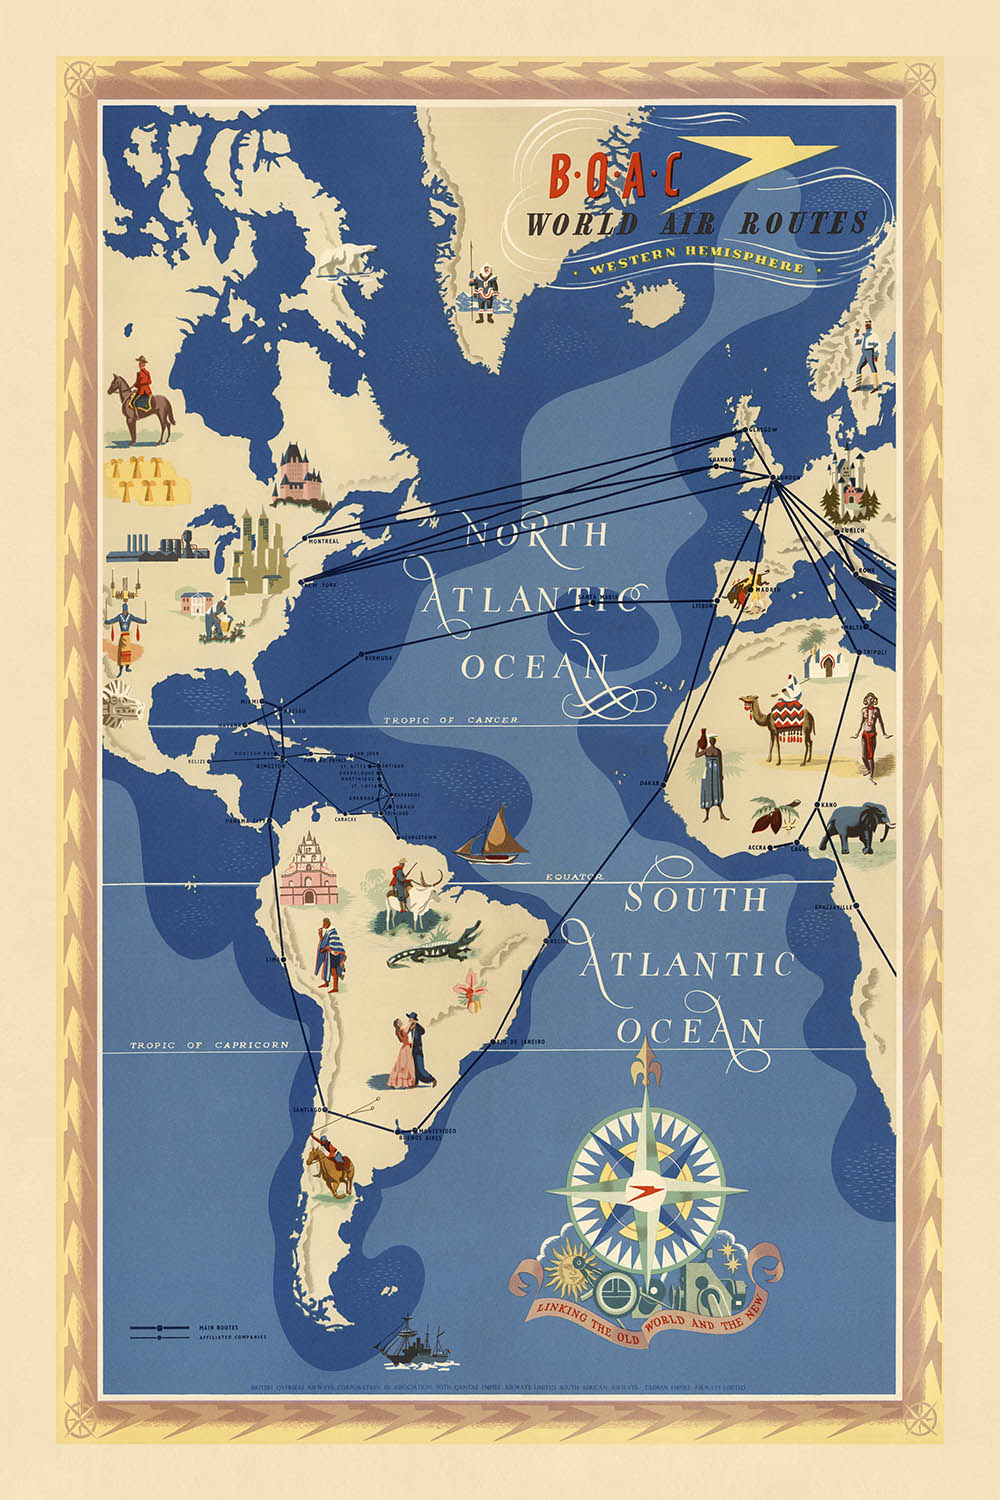 Old Pictorial Map of Western Hemisphere Air Routes by BOAC, 1949: Dawn of the Jet Age